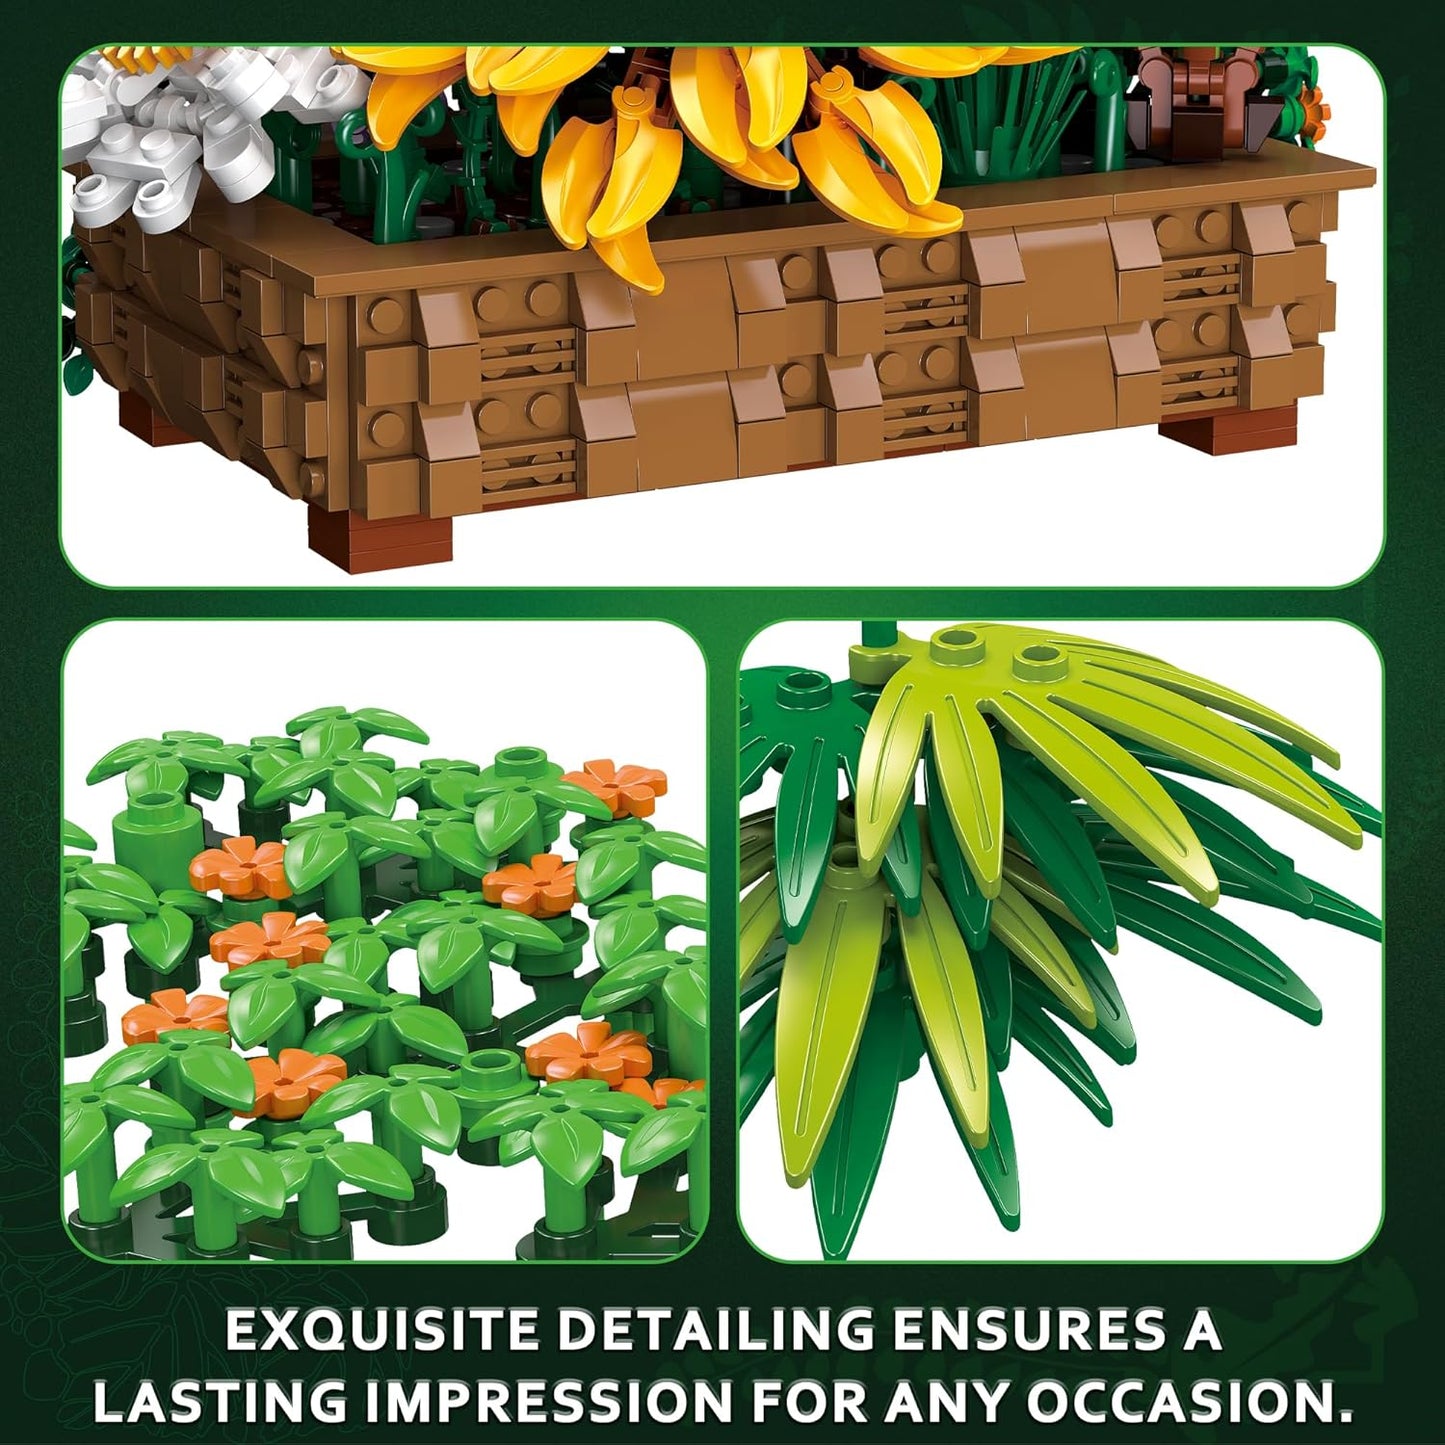 Under the Baubles Flower Botanical Bonsai Building Set - 924pcs, Home Decor, Mother's Day, Valentine's Day, Christmas for Adults and Kids, Climbing Ivy, Sunflower, Chrysanthemum.